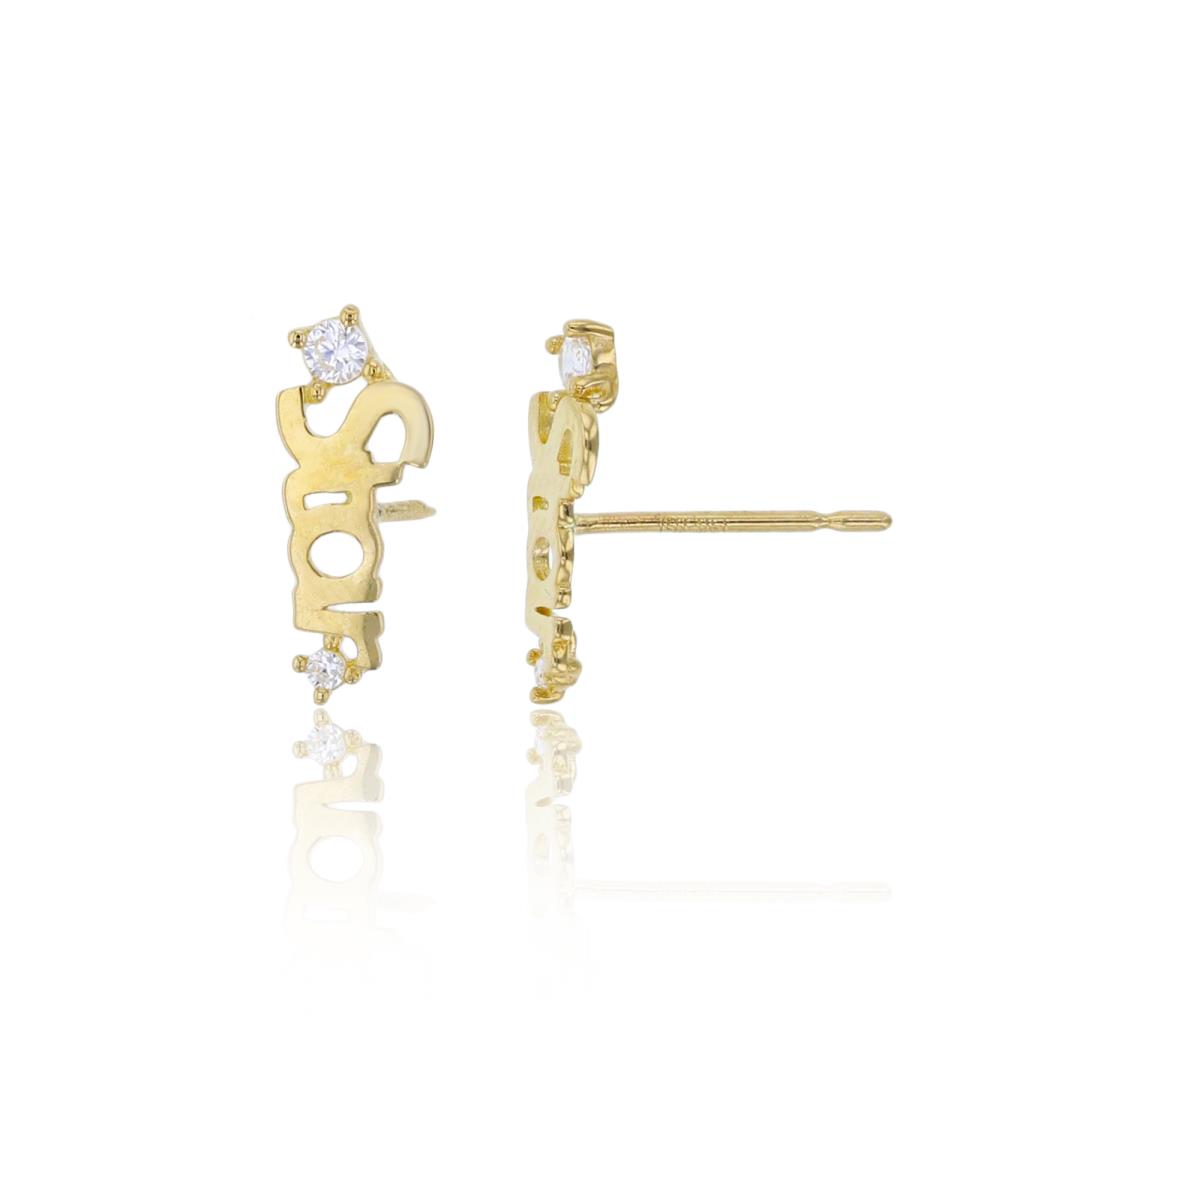 10K Yellow Gold 4x11mm Polished "Star" with Double Rd Cut CZ Stud Earring